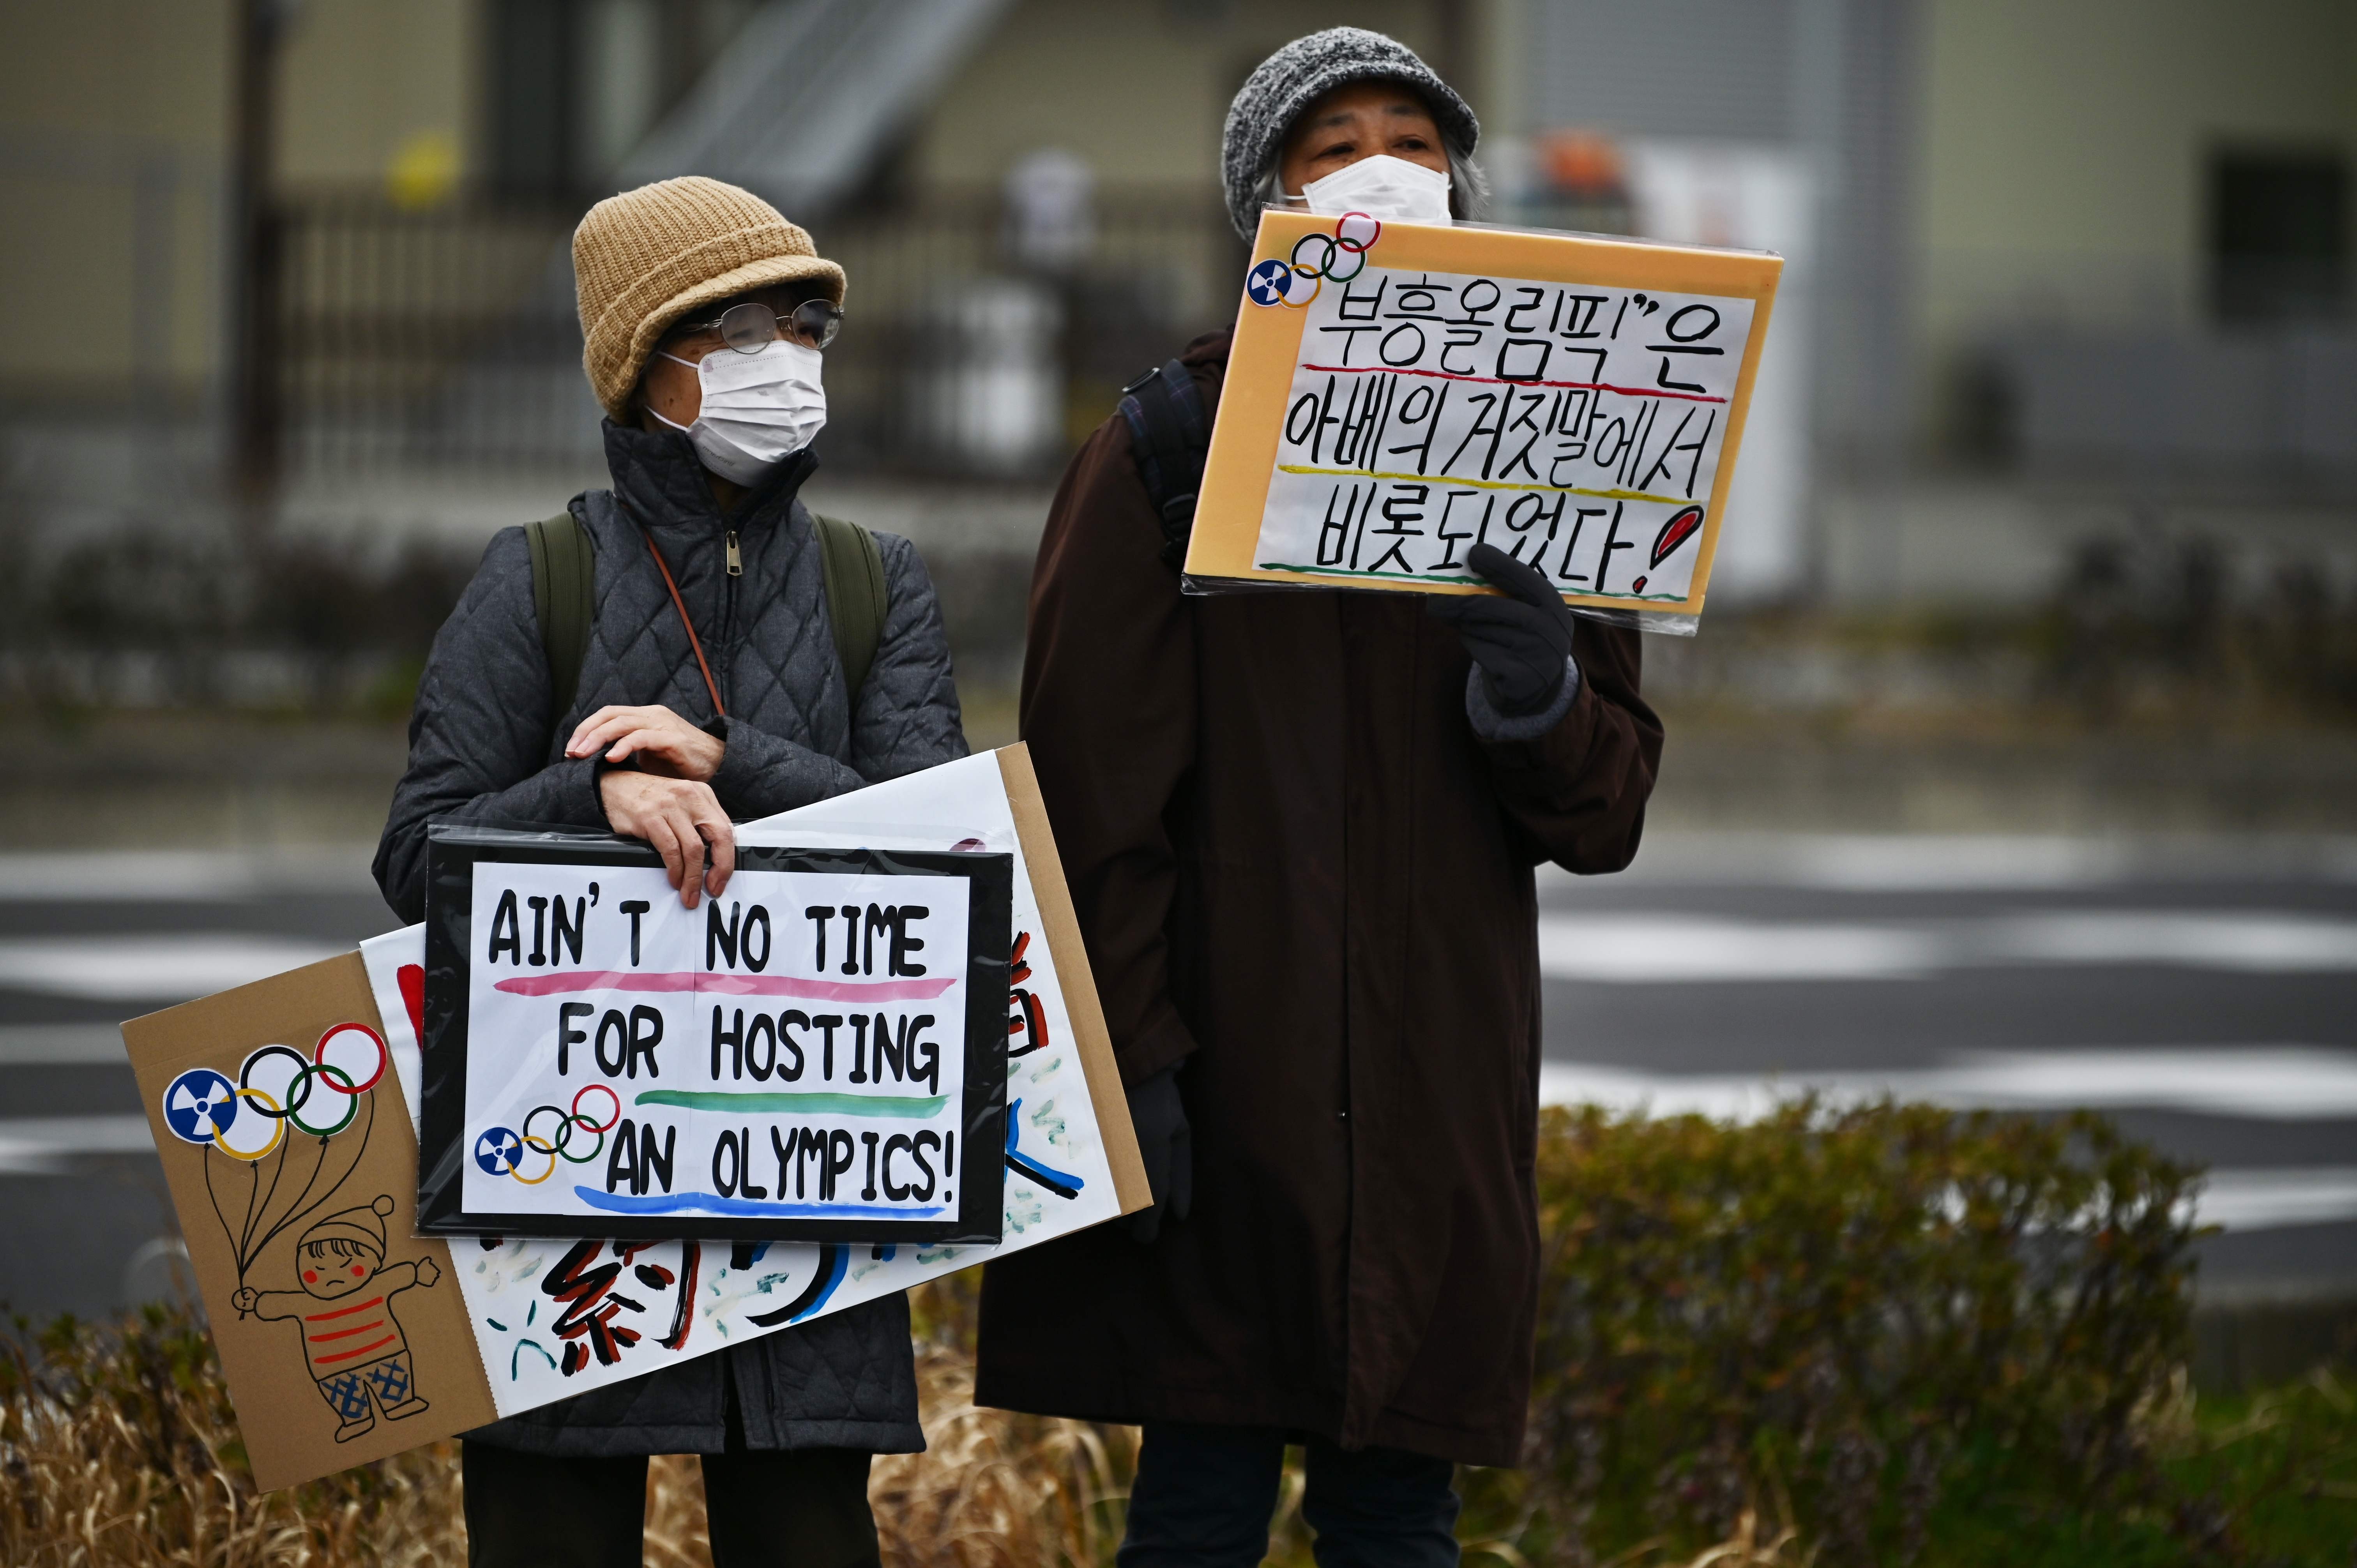 Protesters at a demonstration against the Tokyo Olympics, Prime Minister Shinzo Abe and nuclear energy on February 29, near the J-Village stadium that will host the start of the Olympic torch relay in Naraha, Fukushima prefecture. Photo: AFP